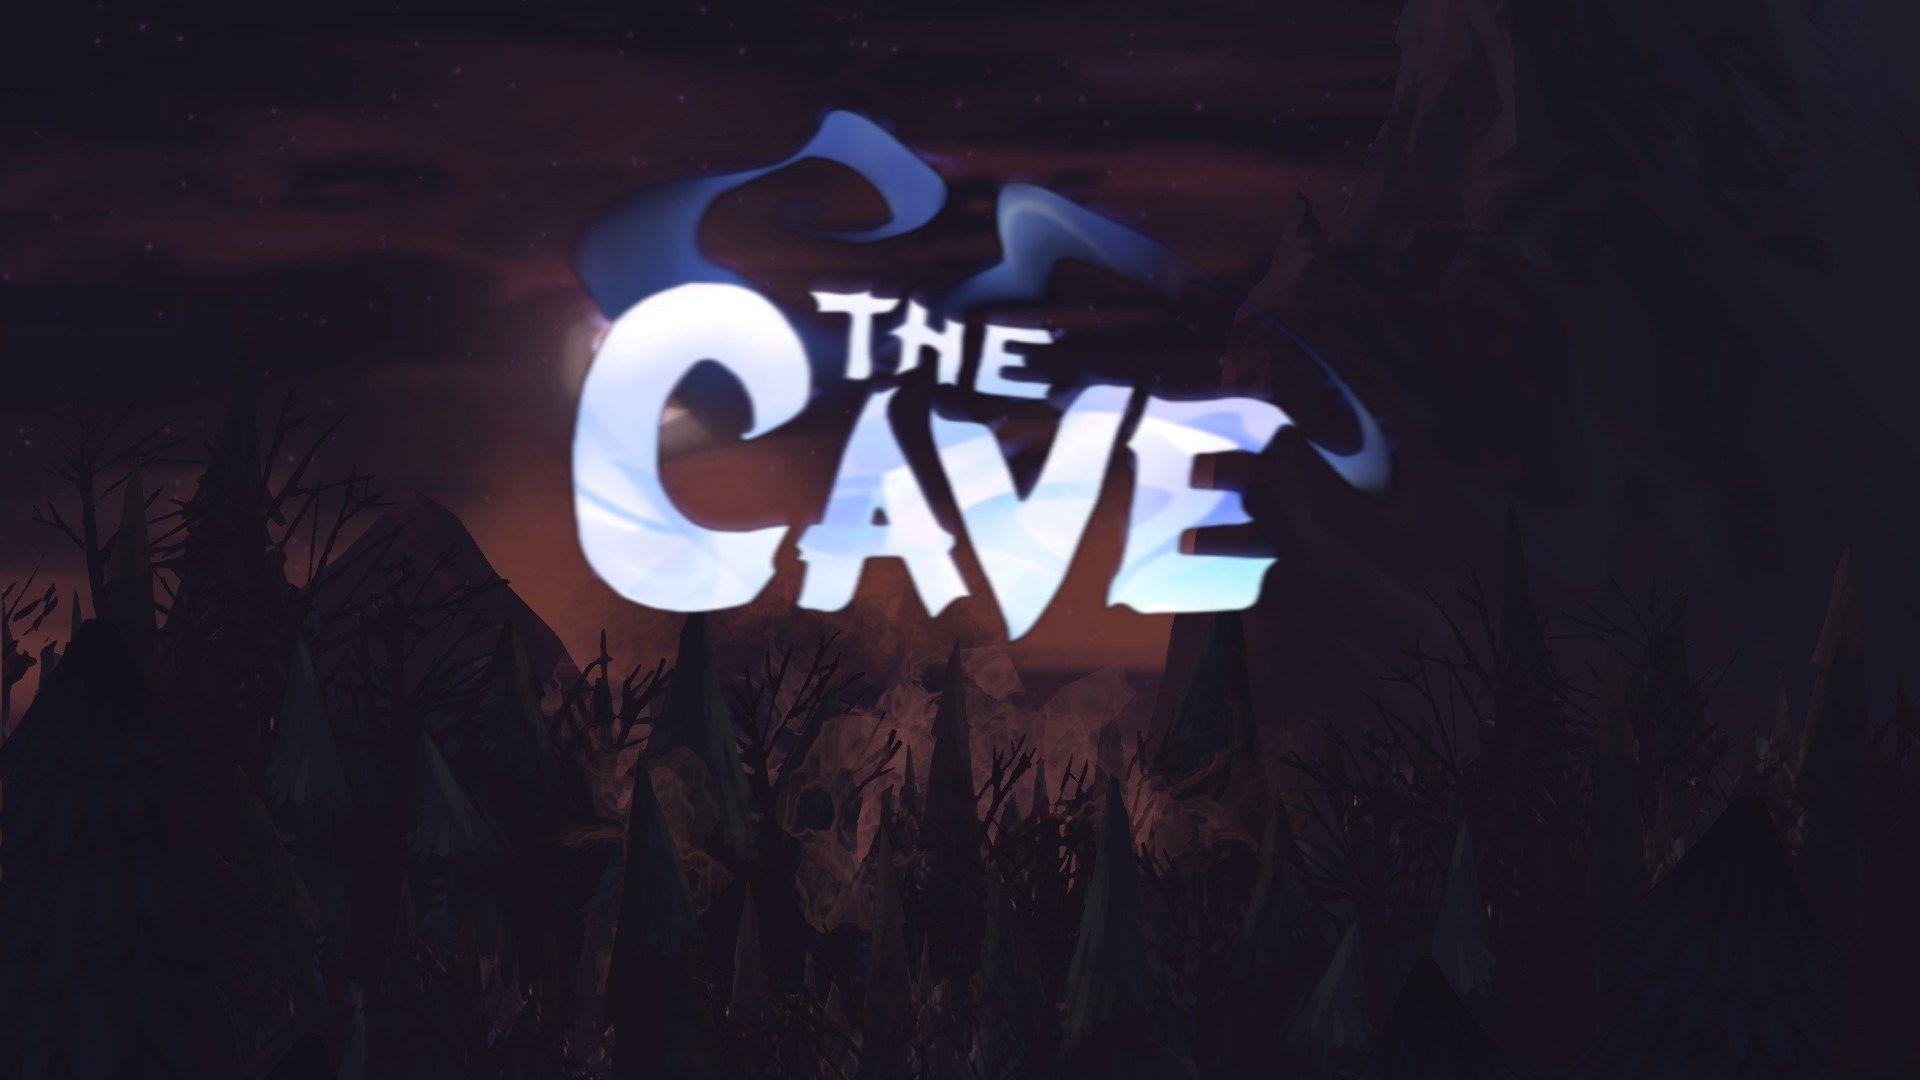 Cave Logo - The Cave logo - OnPause